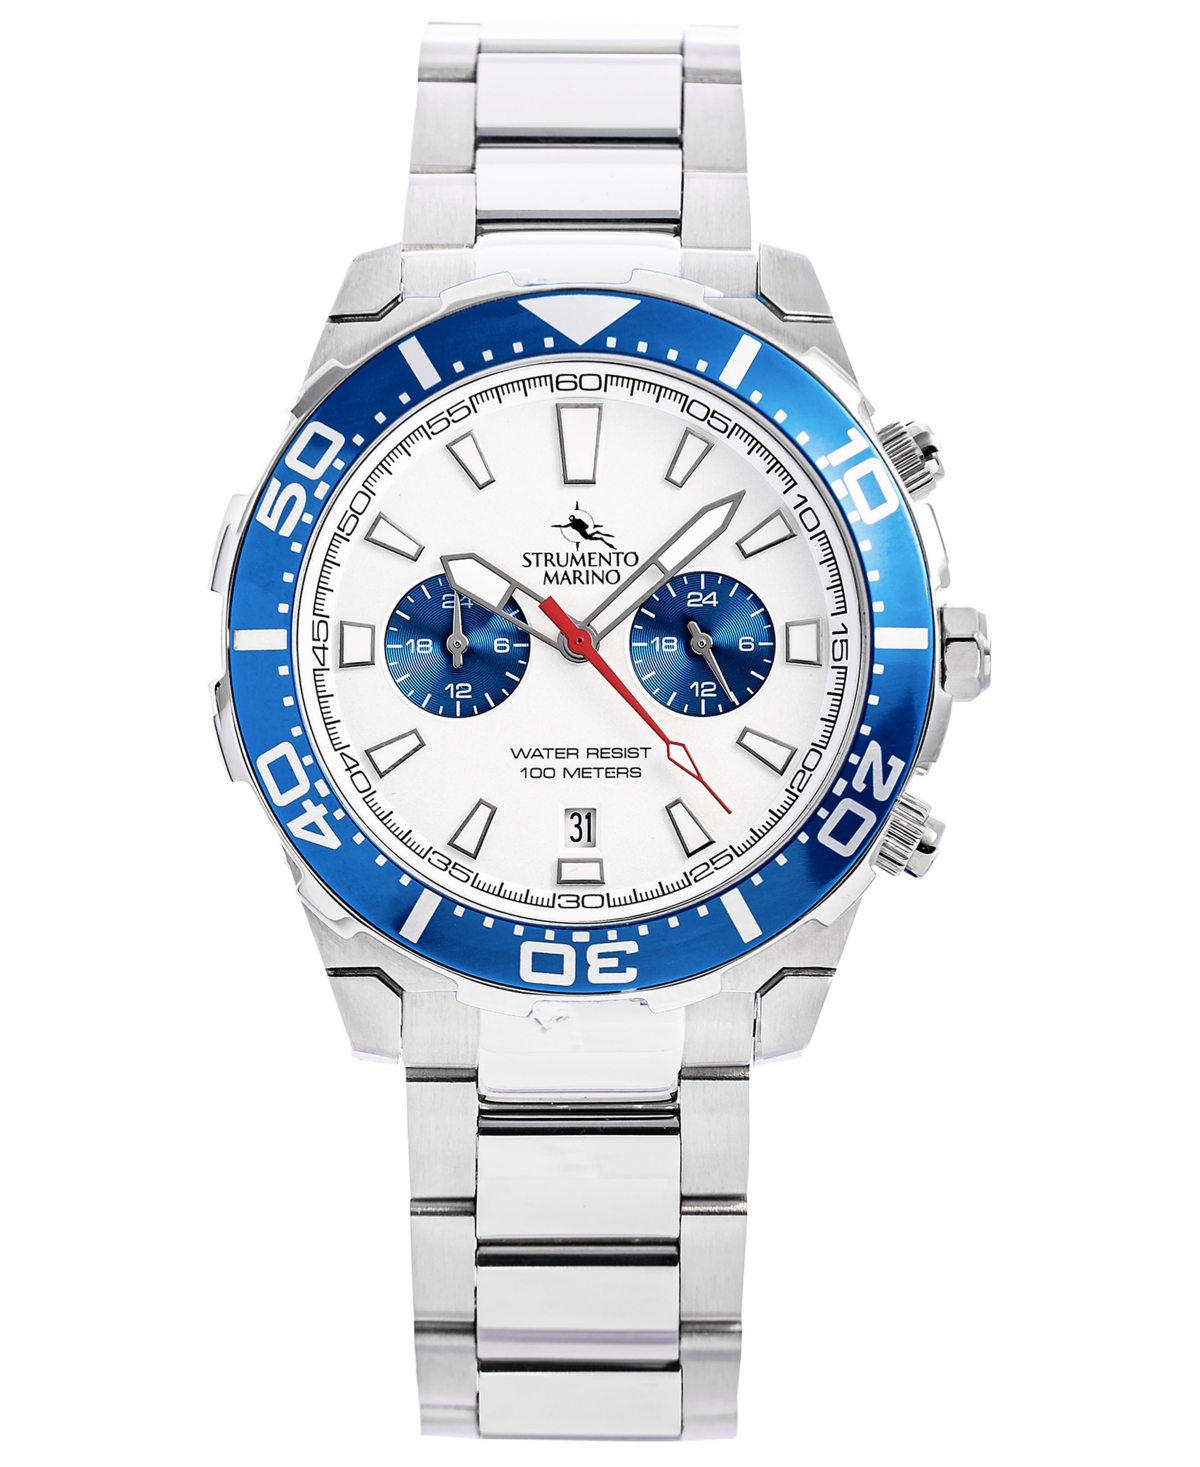 Men's Skipper Dual time Zone Stainless Steel Bracelet Watch 44mm, Created for Macy's - Stainless Steel  Blue